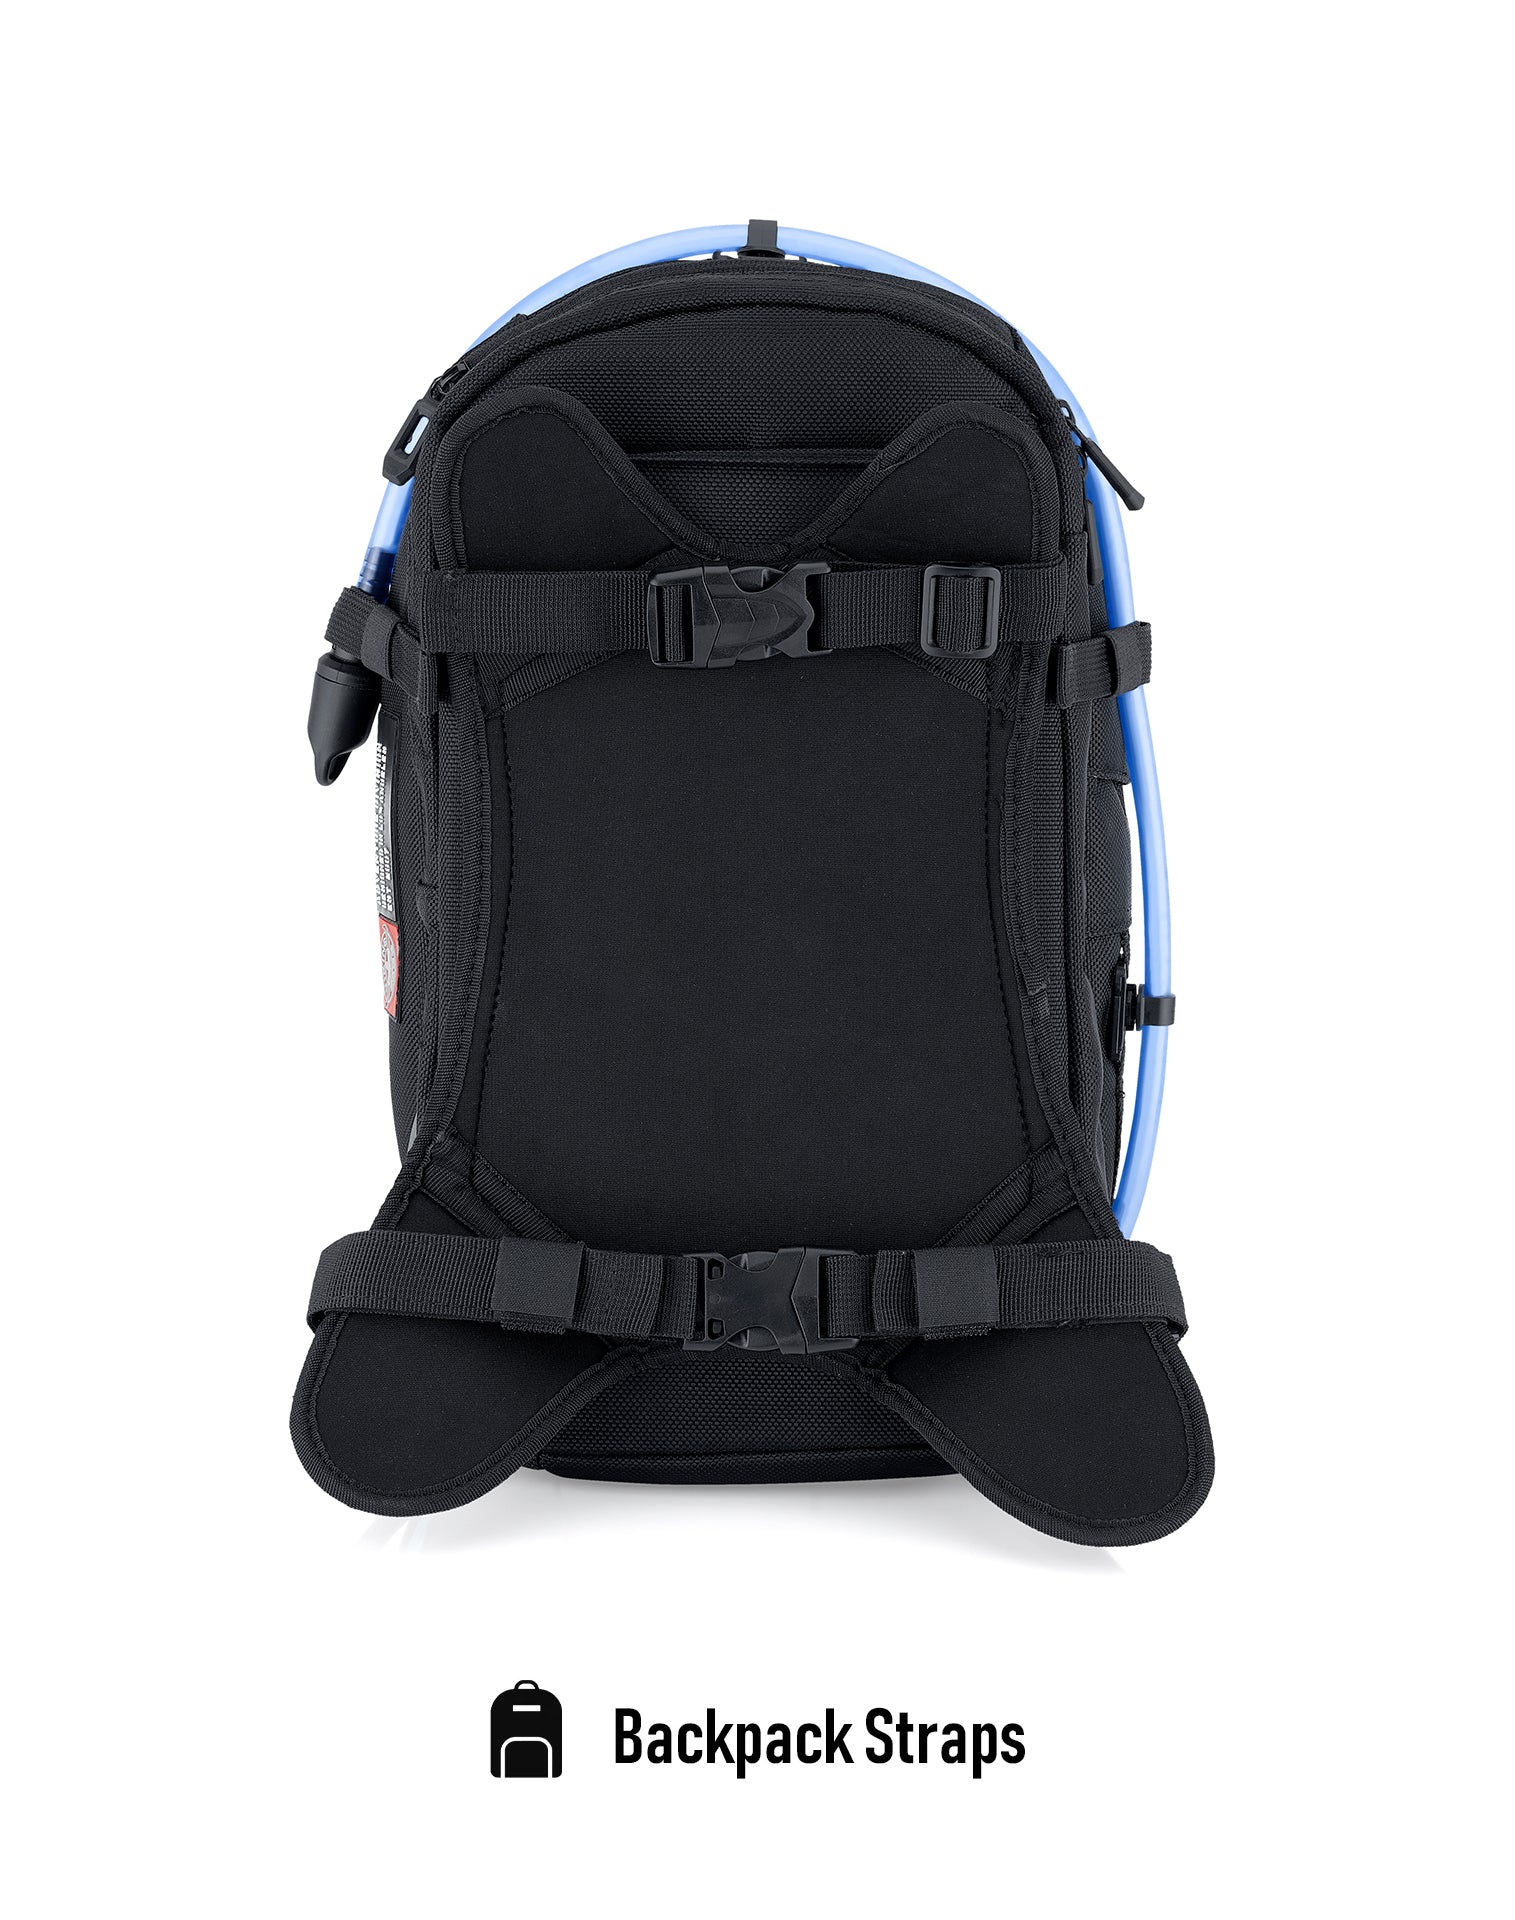 Viking Apex Yamaha ADV Touring Backpack with Hydration Pack